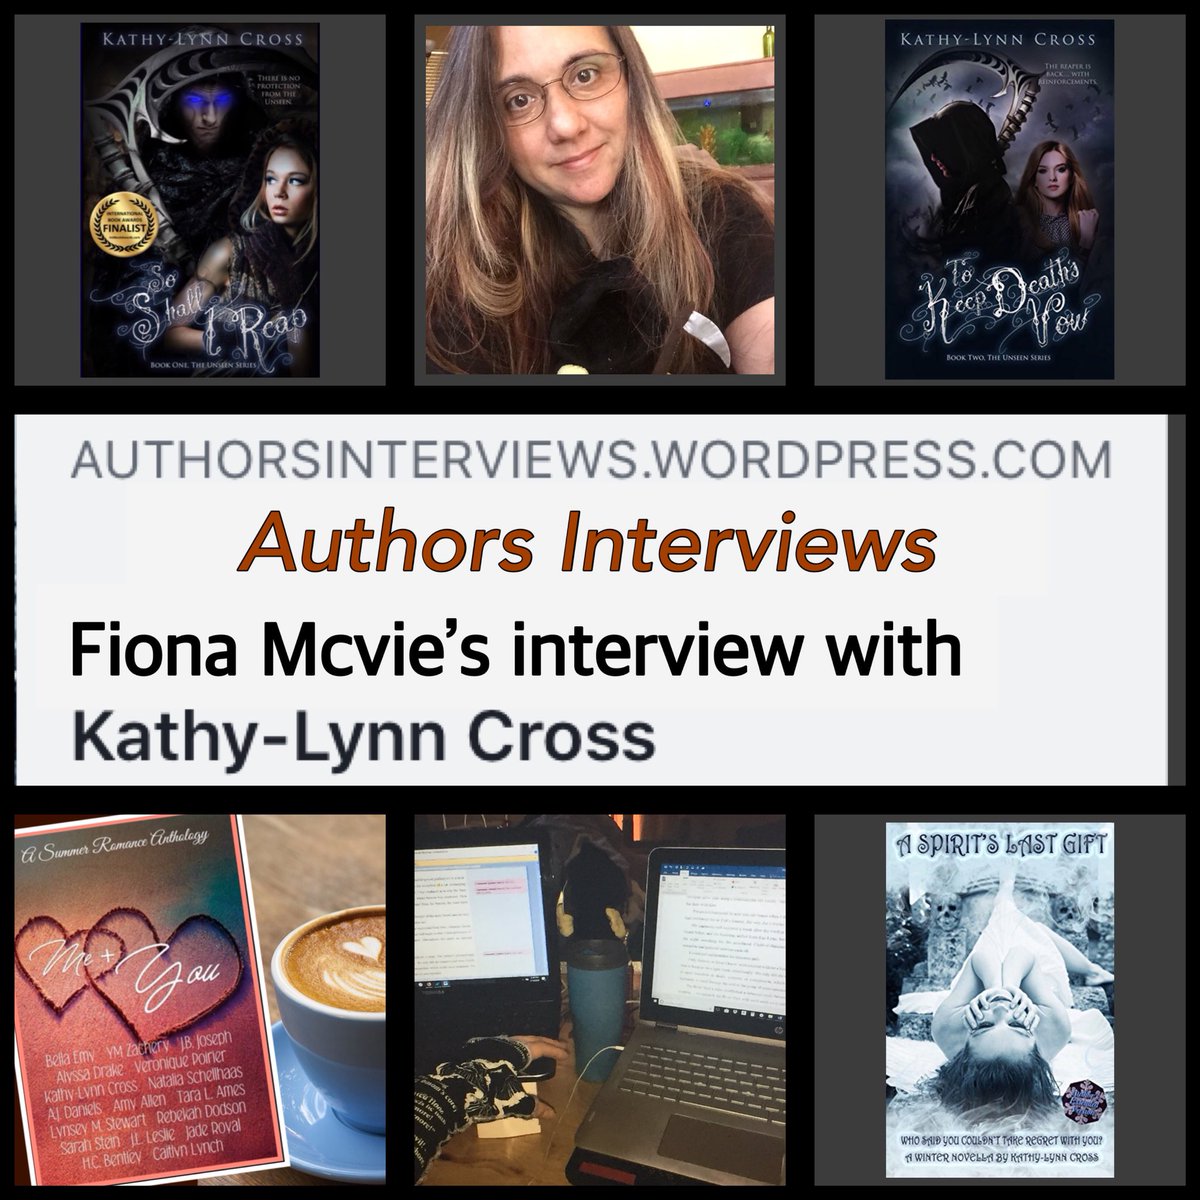 Fiona Mcvie interviewed me for her author blog, Authors Interviews.
wp.me/p3uv2y-87I

#authorsinterview #unseenseries #paranormalYA #reapers #gettoknowme